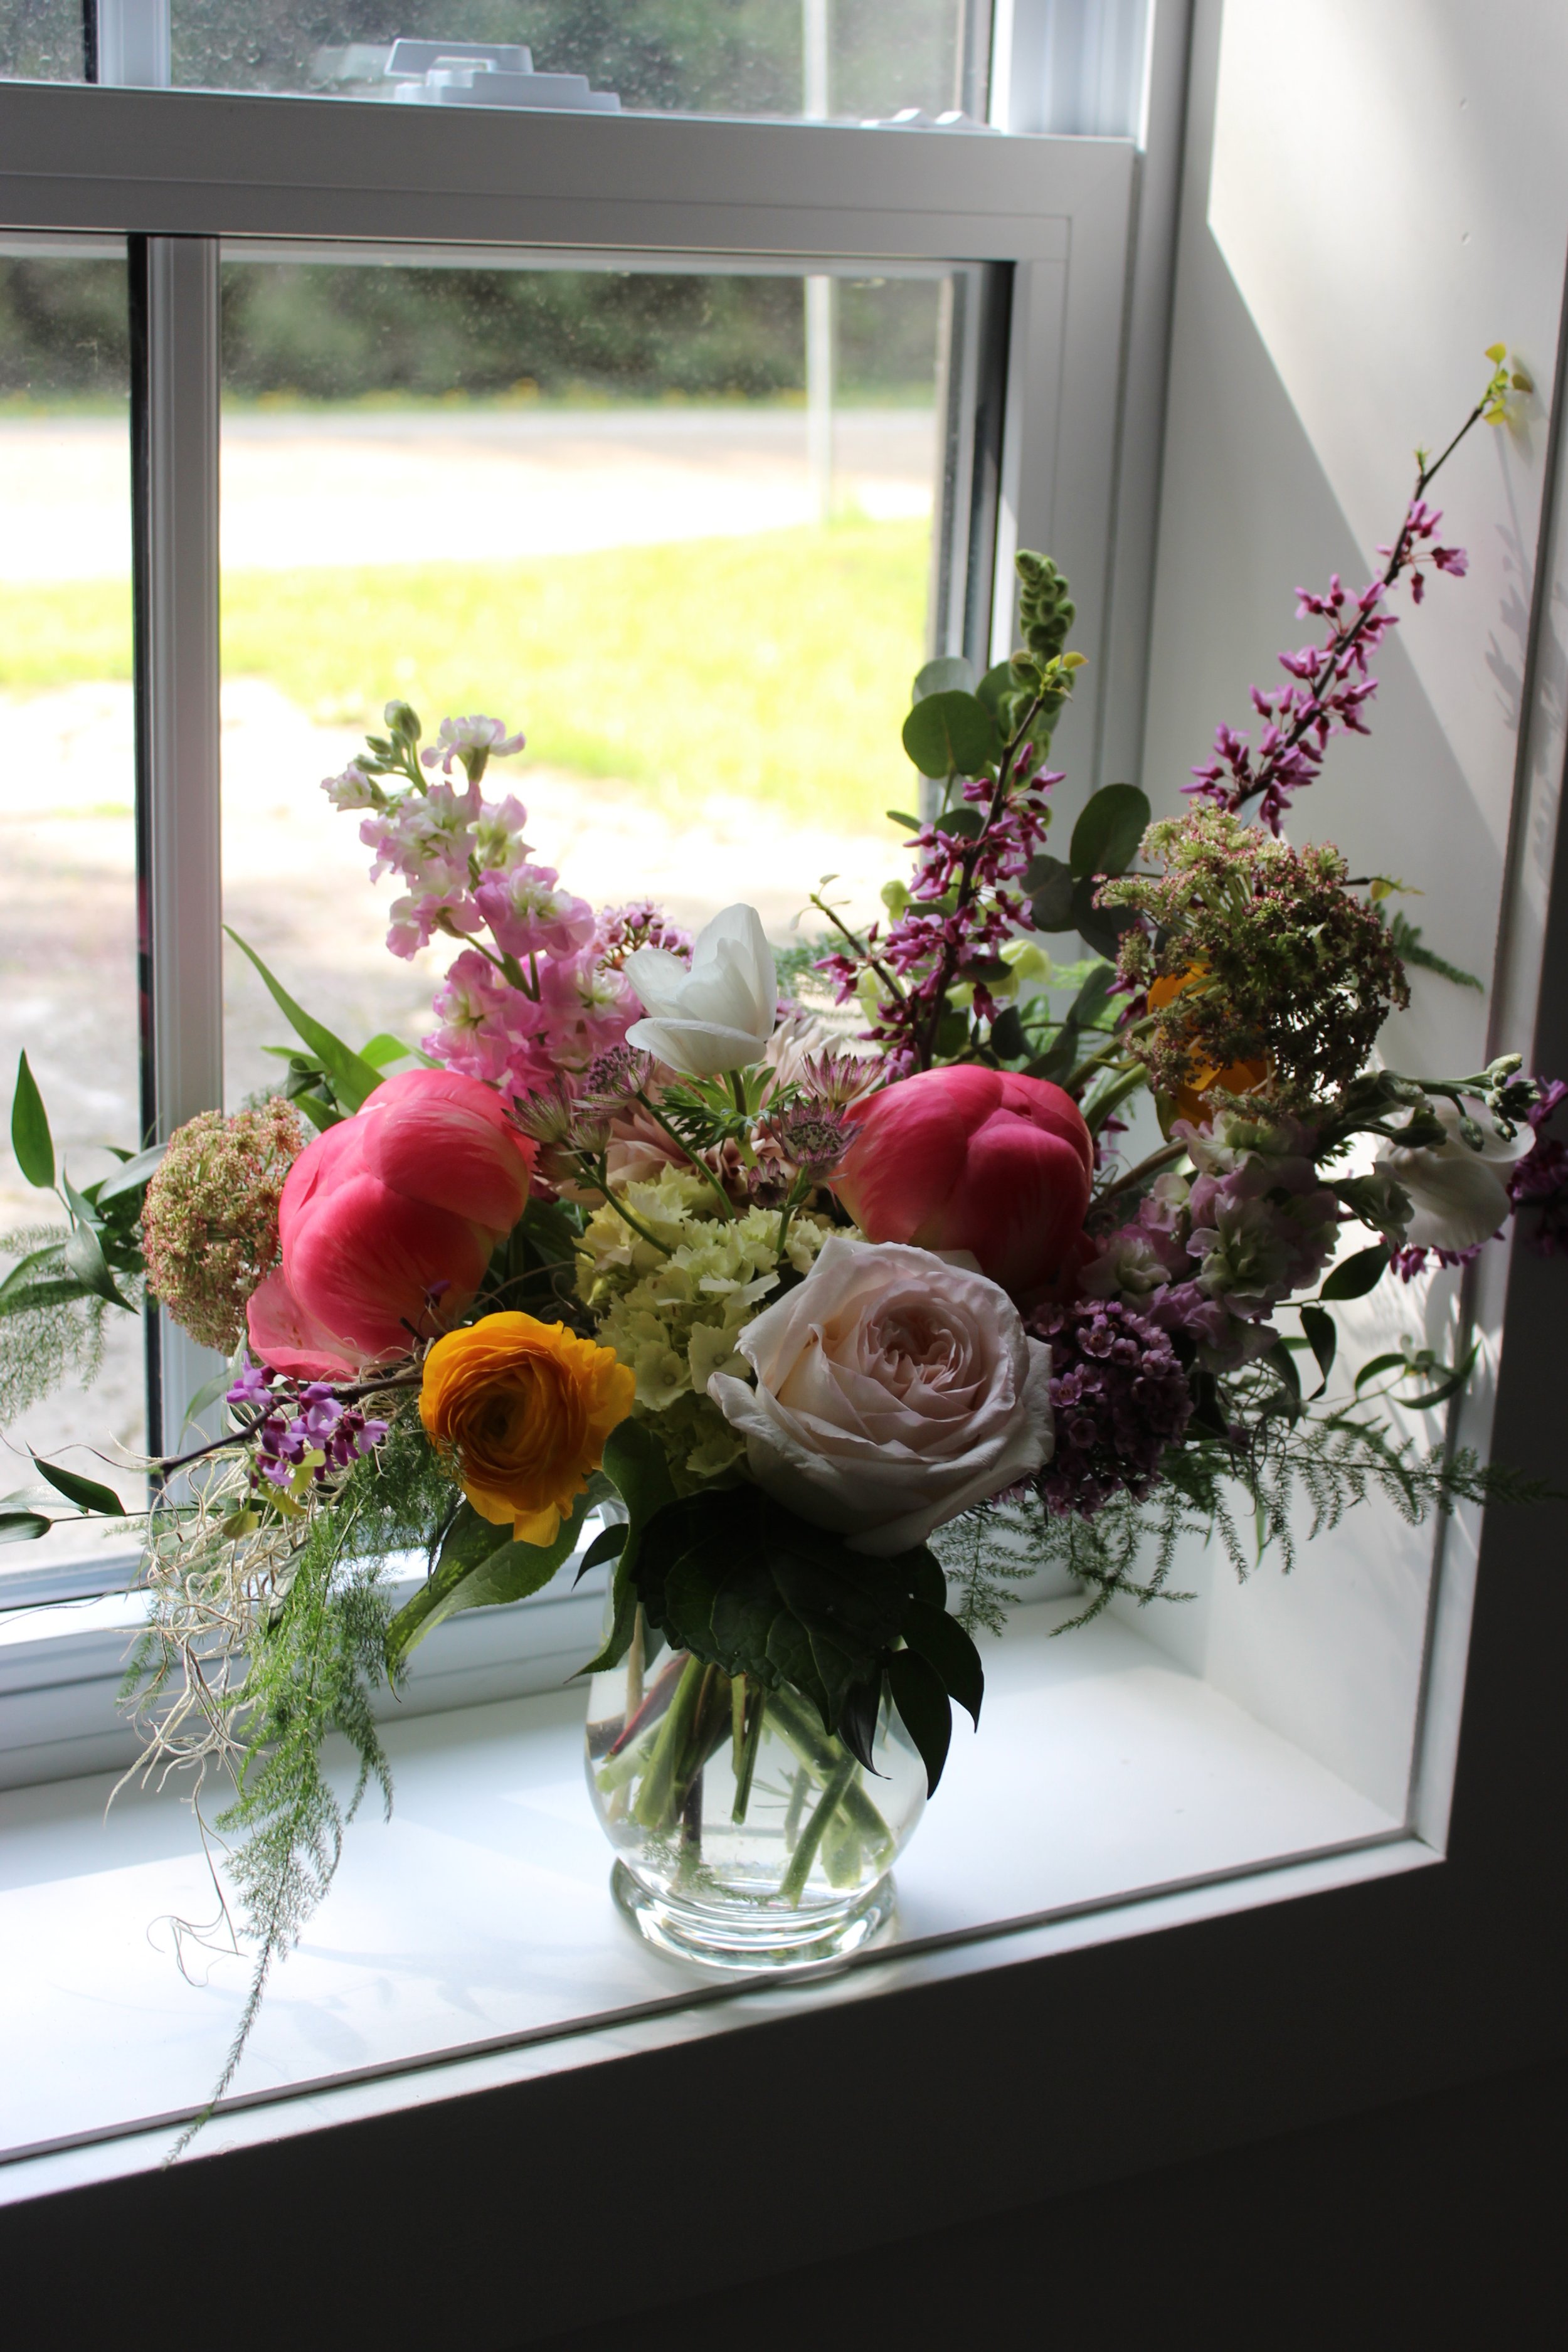 Floral piece by the window